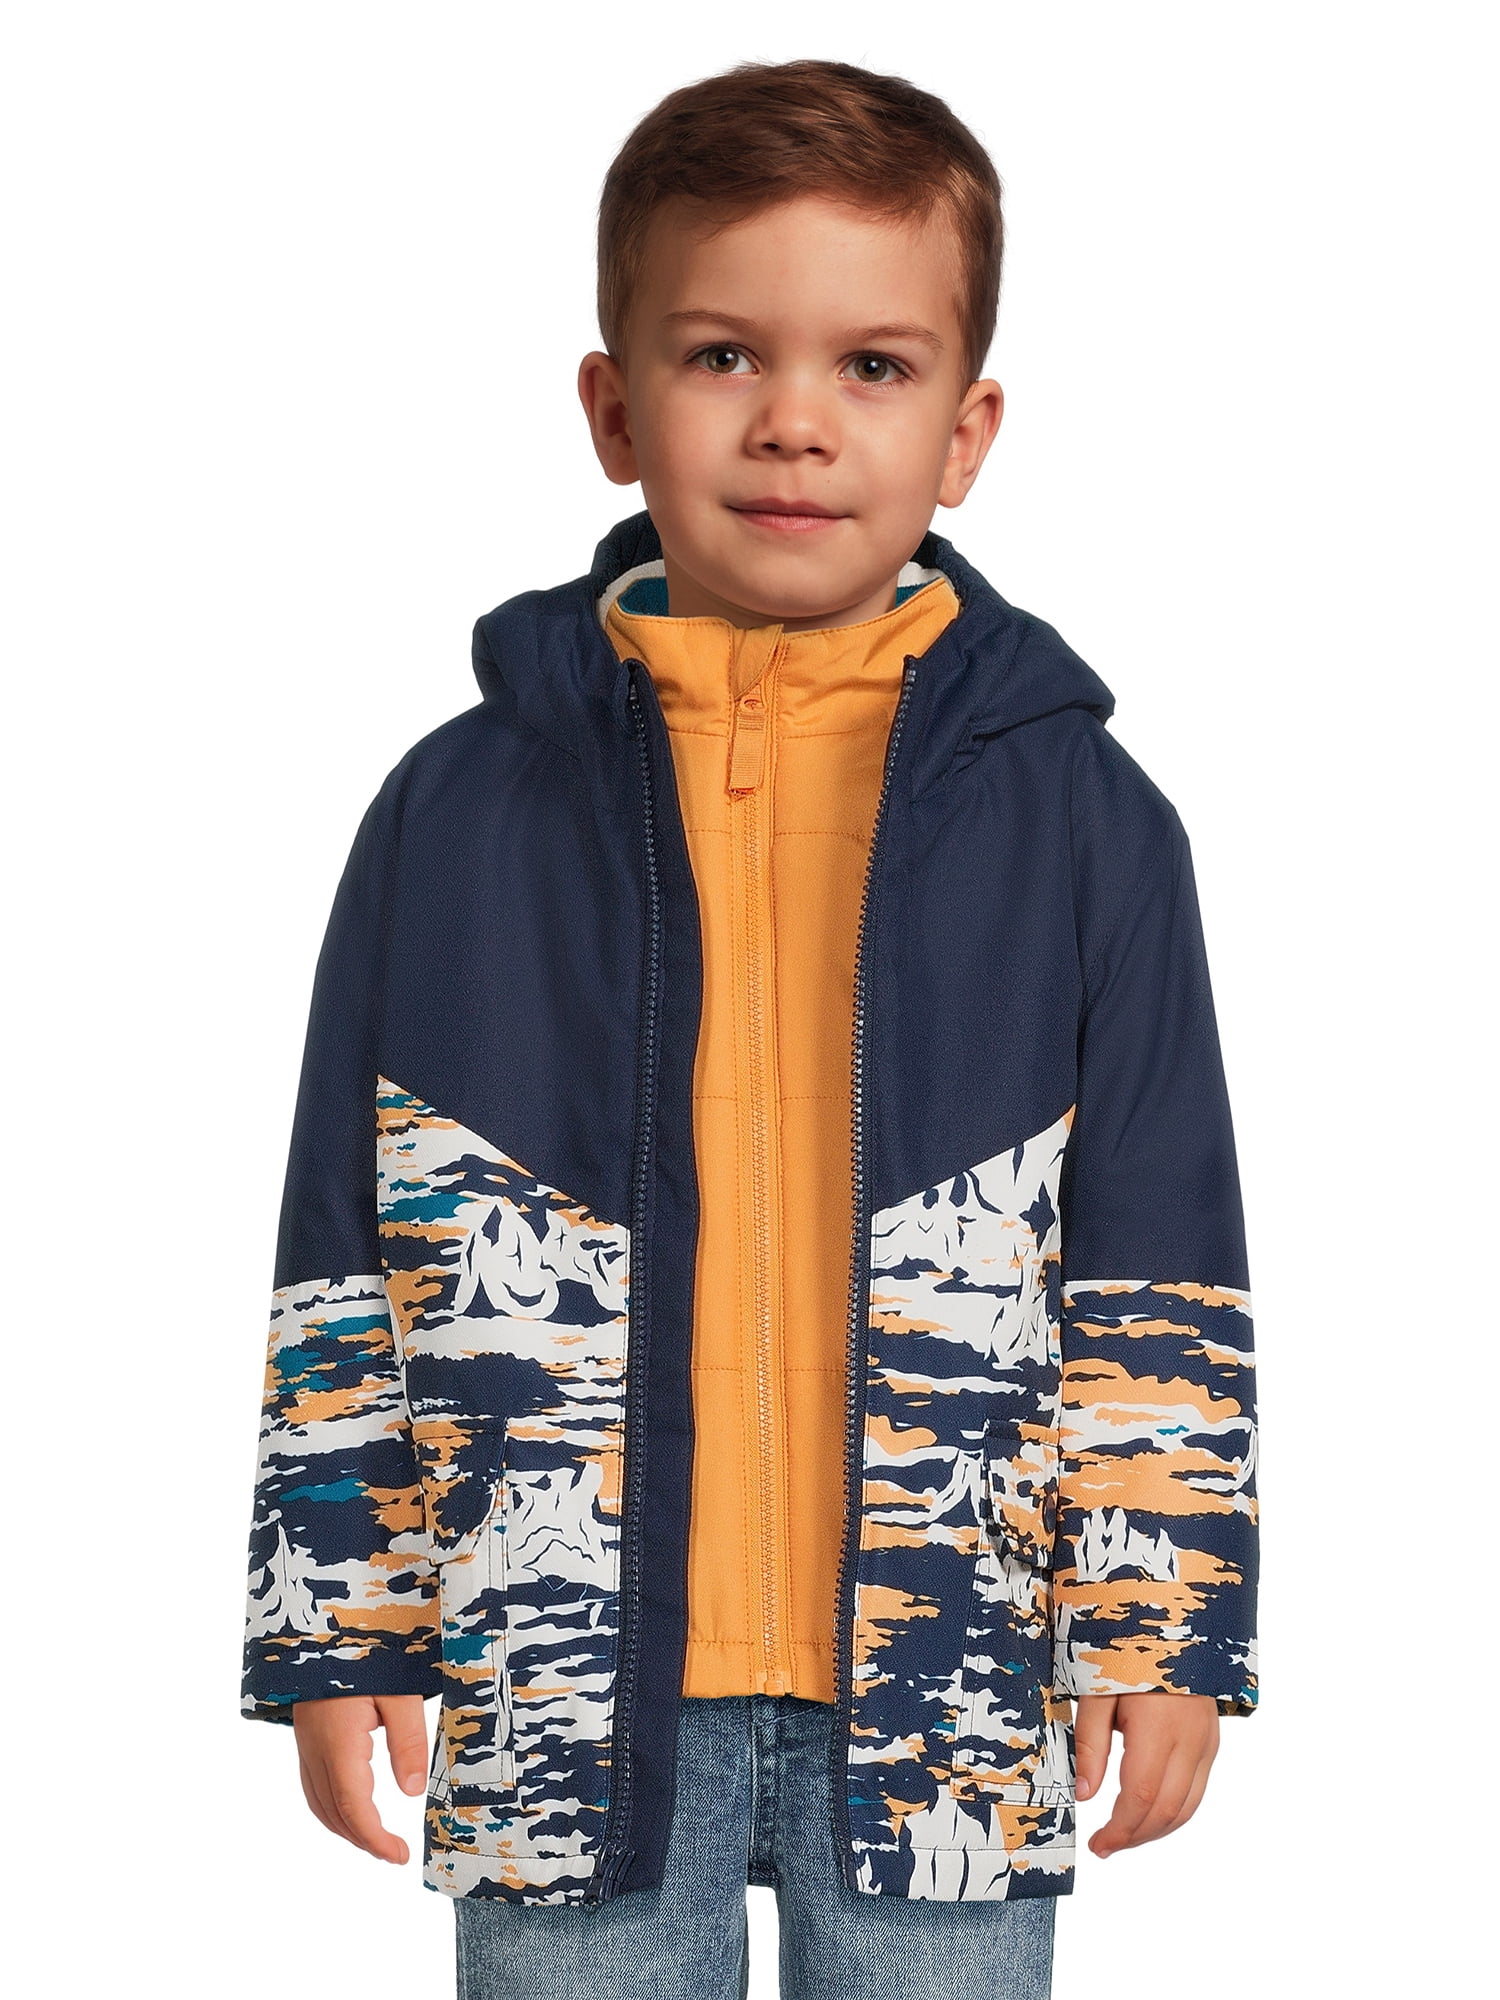 Swiss Tech Toddler Boys' or Girls' 4-in-1 Heavyweight Systems Jacket w/ Hood (Various, Size 2T) $7.85 & More + Free S&H w/ Walmart+ or $35+